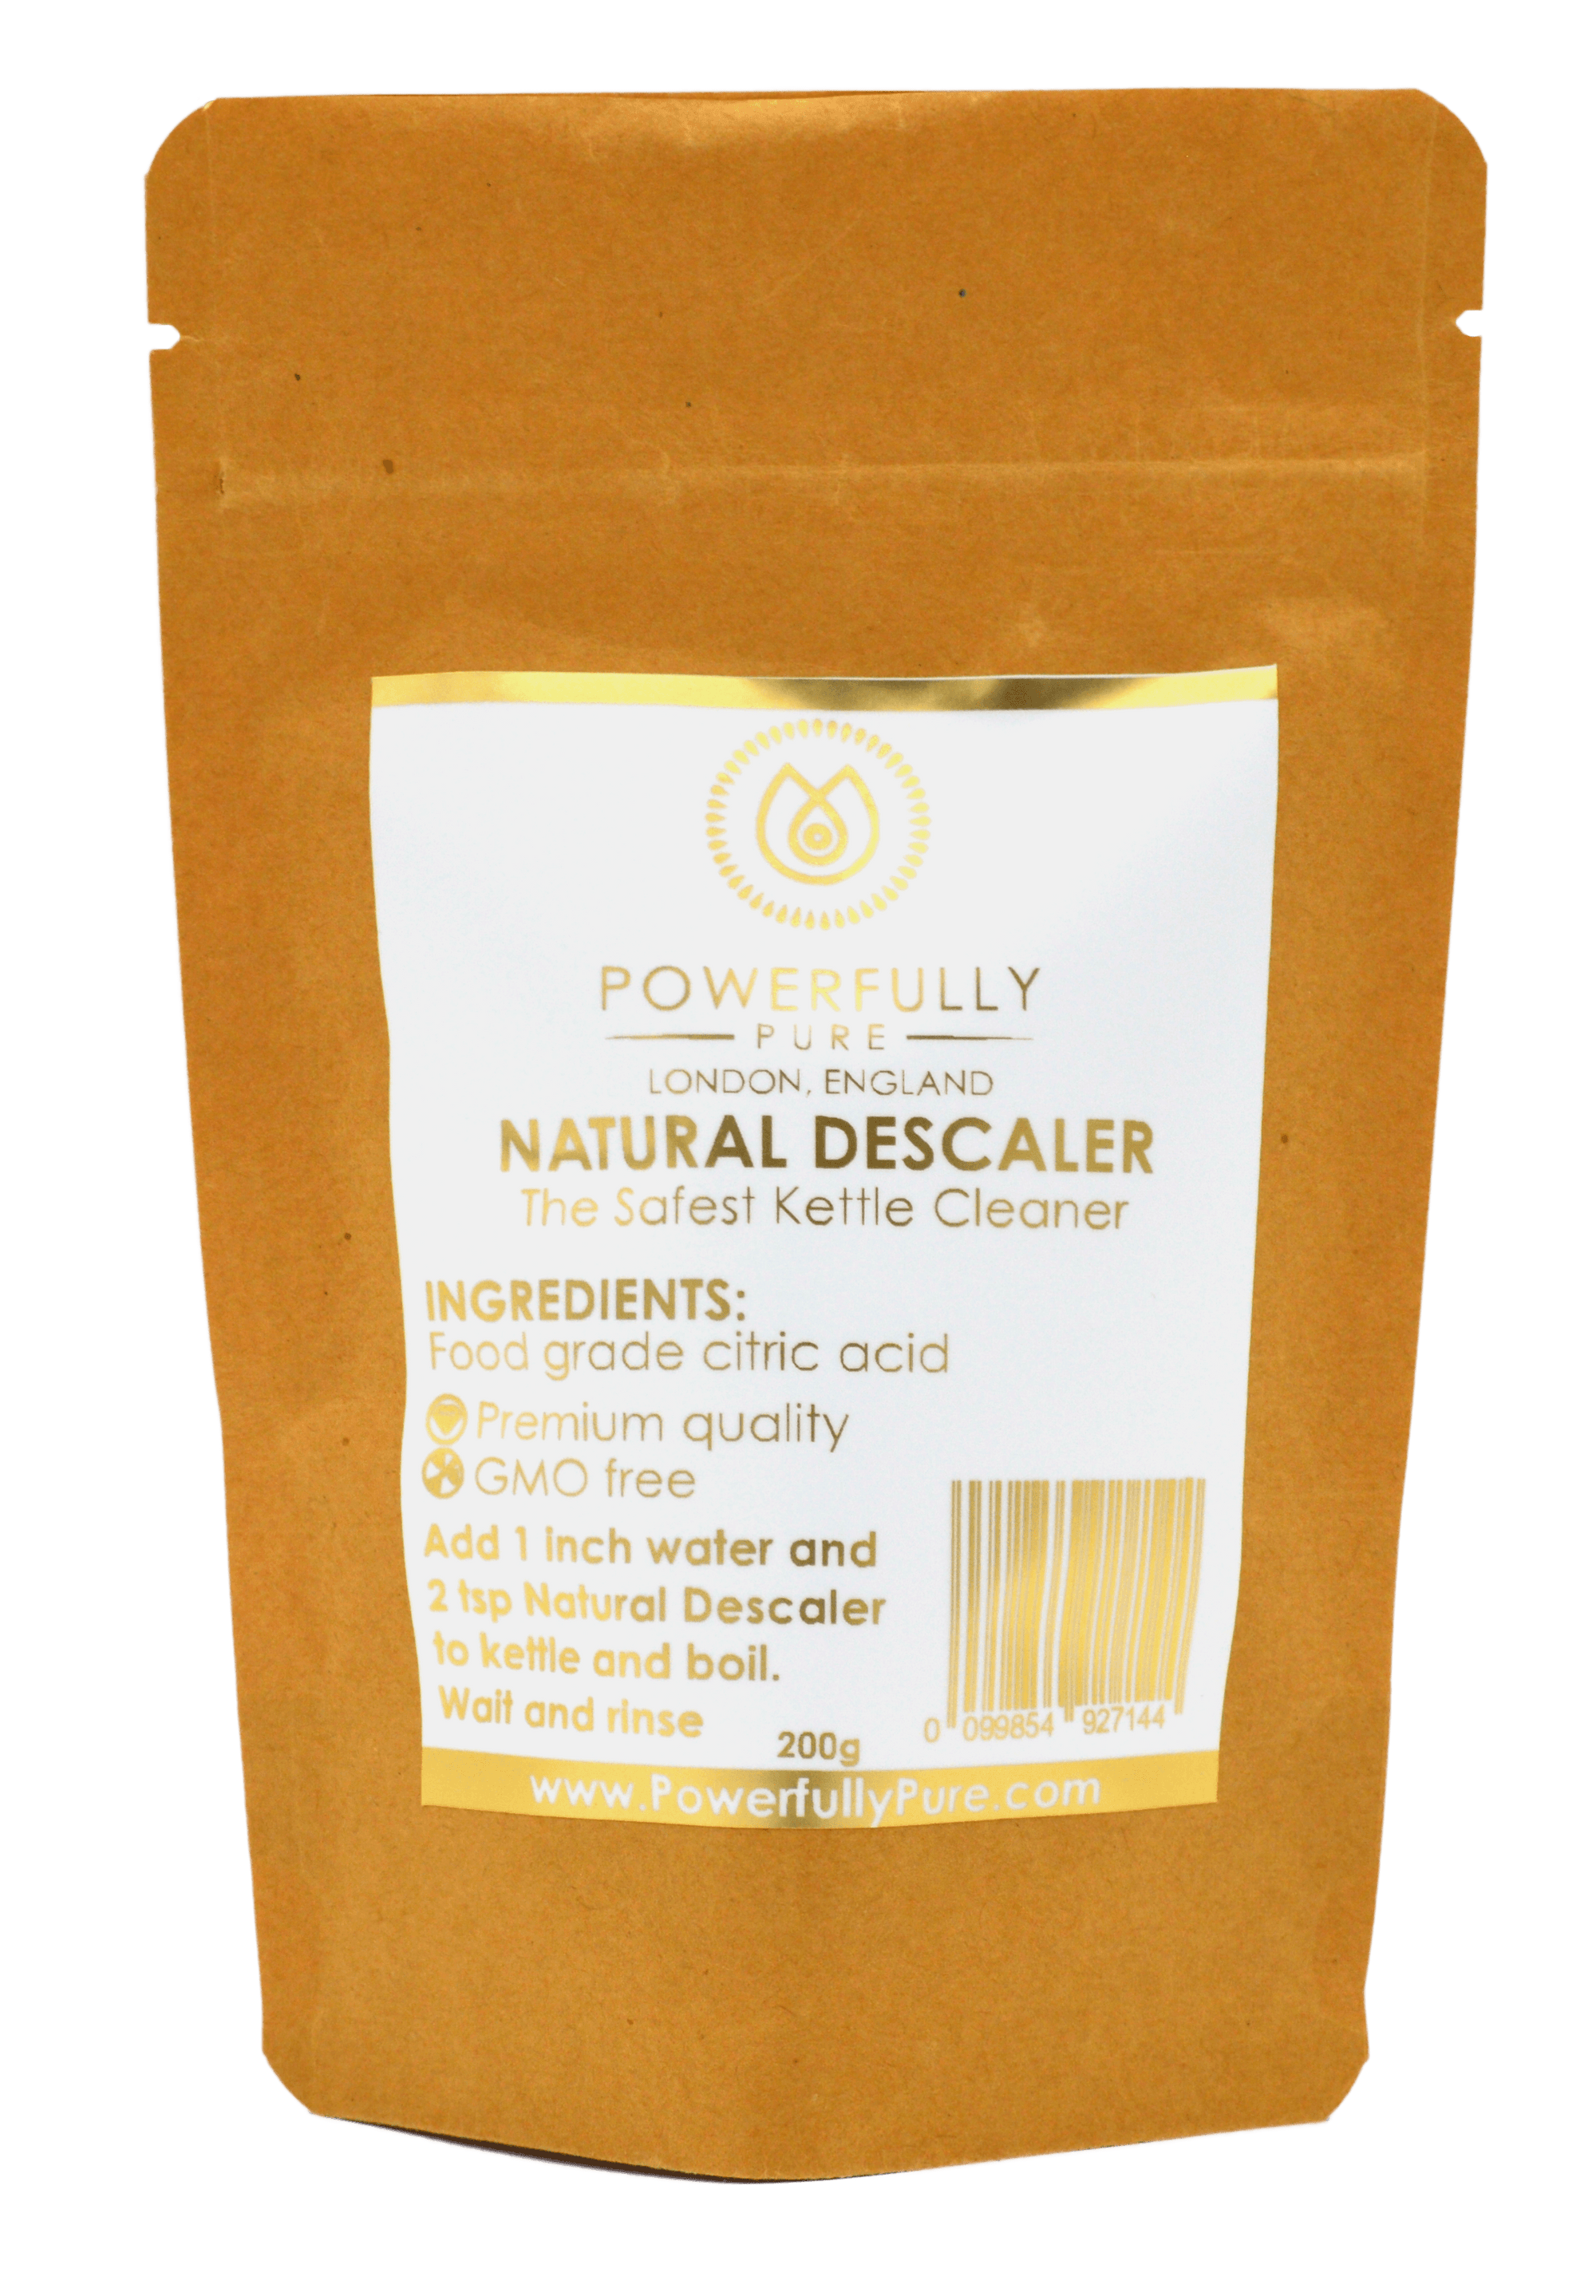 Natural Descaler - The Safest Kettle Cleaner - Powerfully Pure